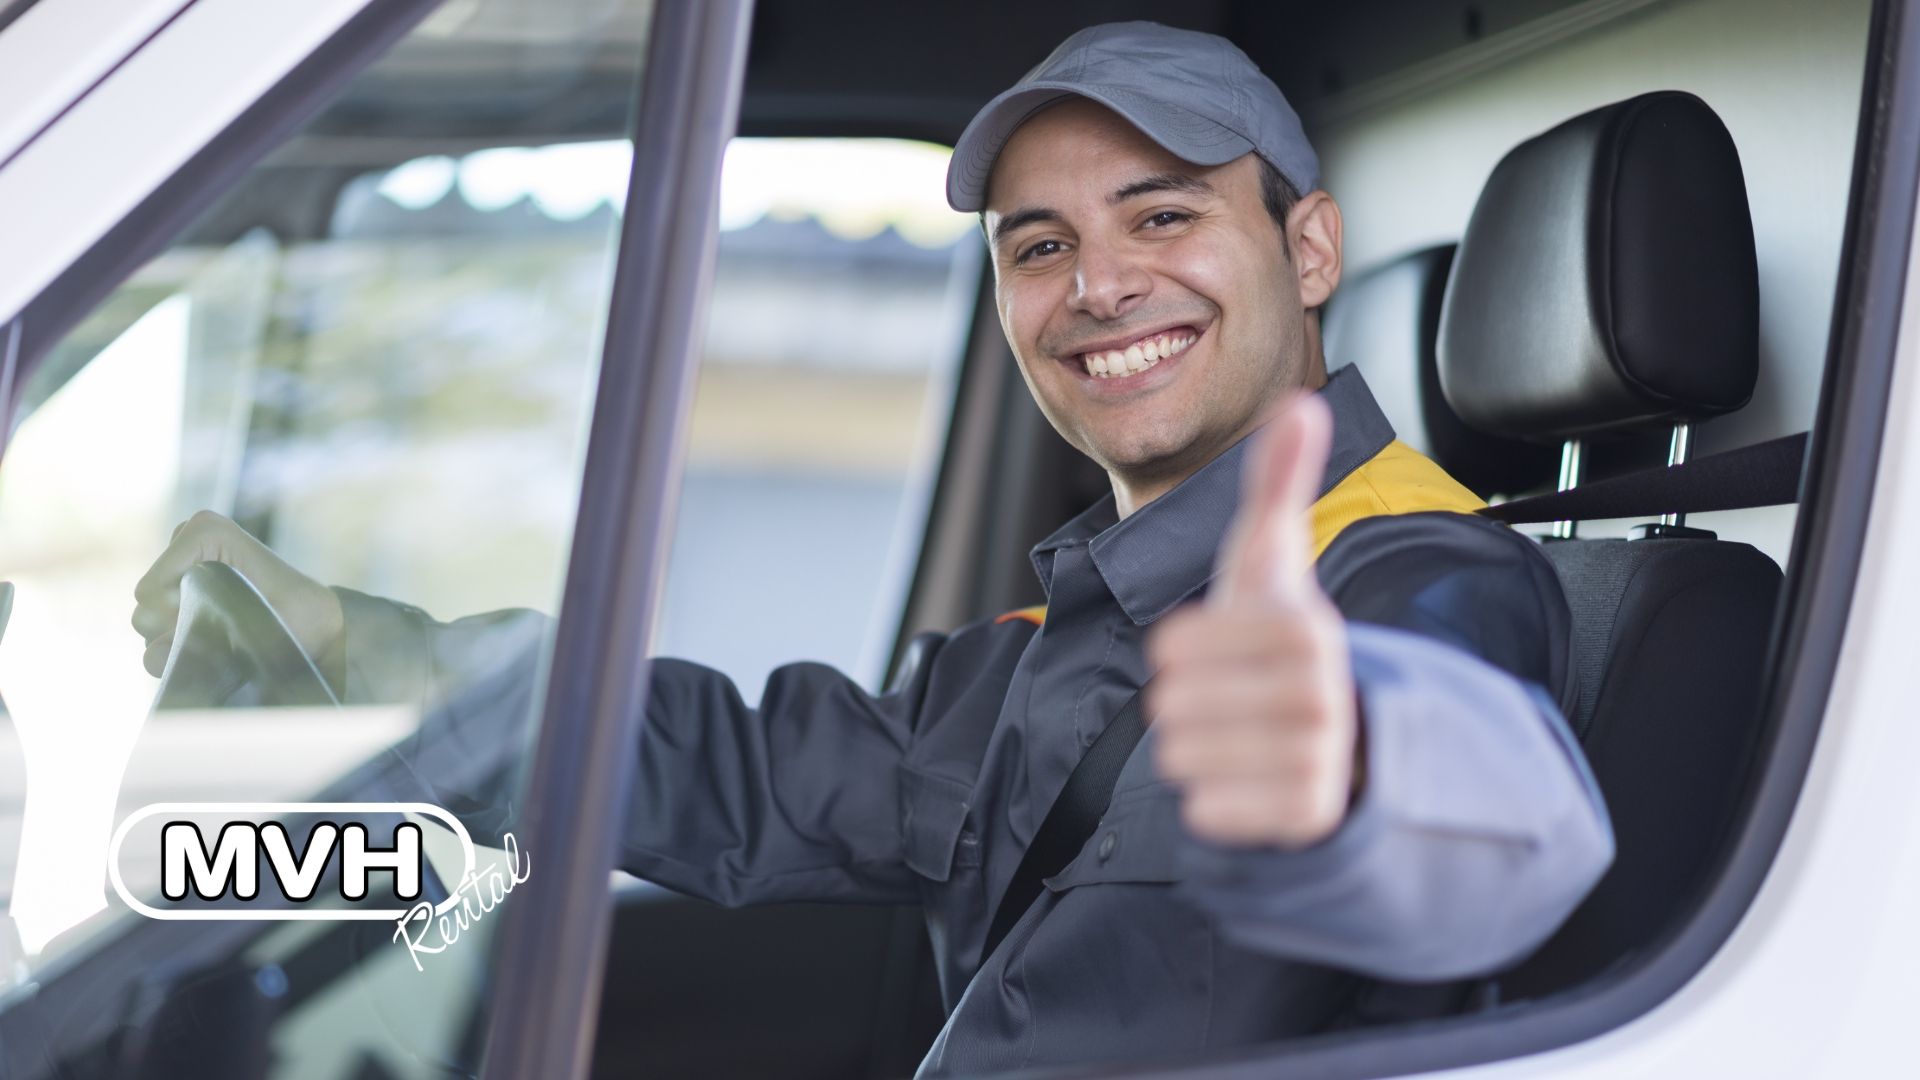 ​​​Maintaining great physical and mental health while being a van driver has its obstacles. However, these small changes can make a big difference.